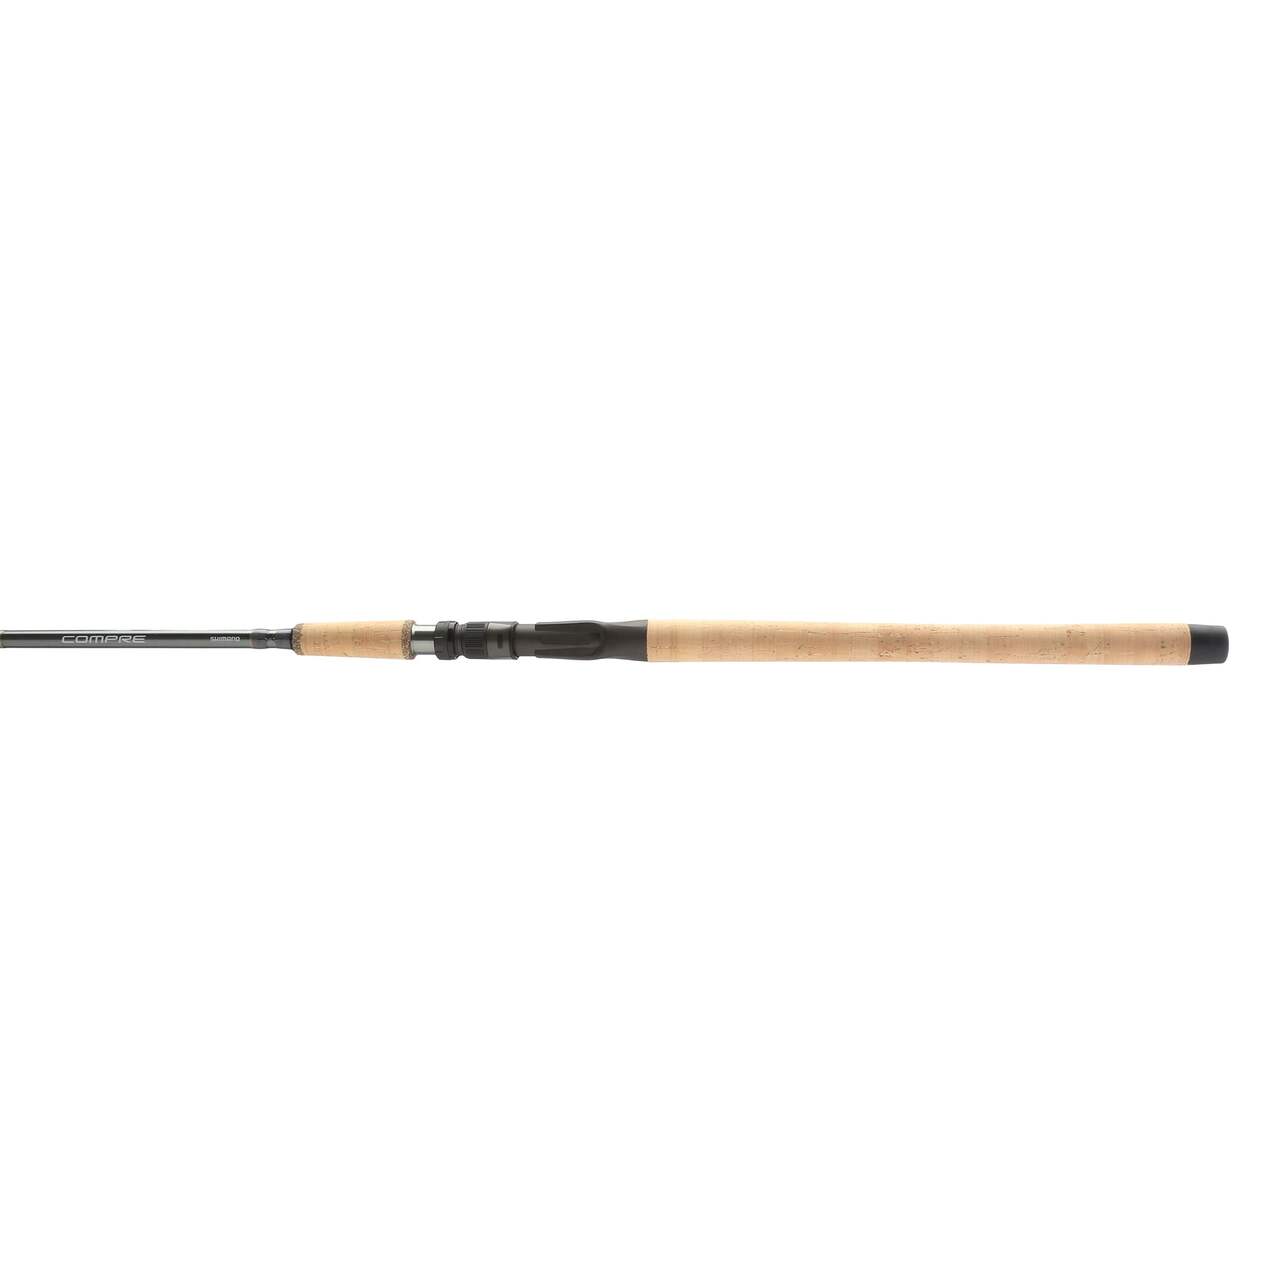 Shimano Compre BC Casting Fishing Rod with AAA Cork Handle, Medium-Heavy, 10 -ft 6-in